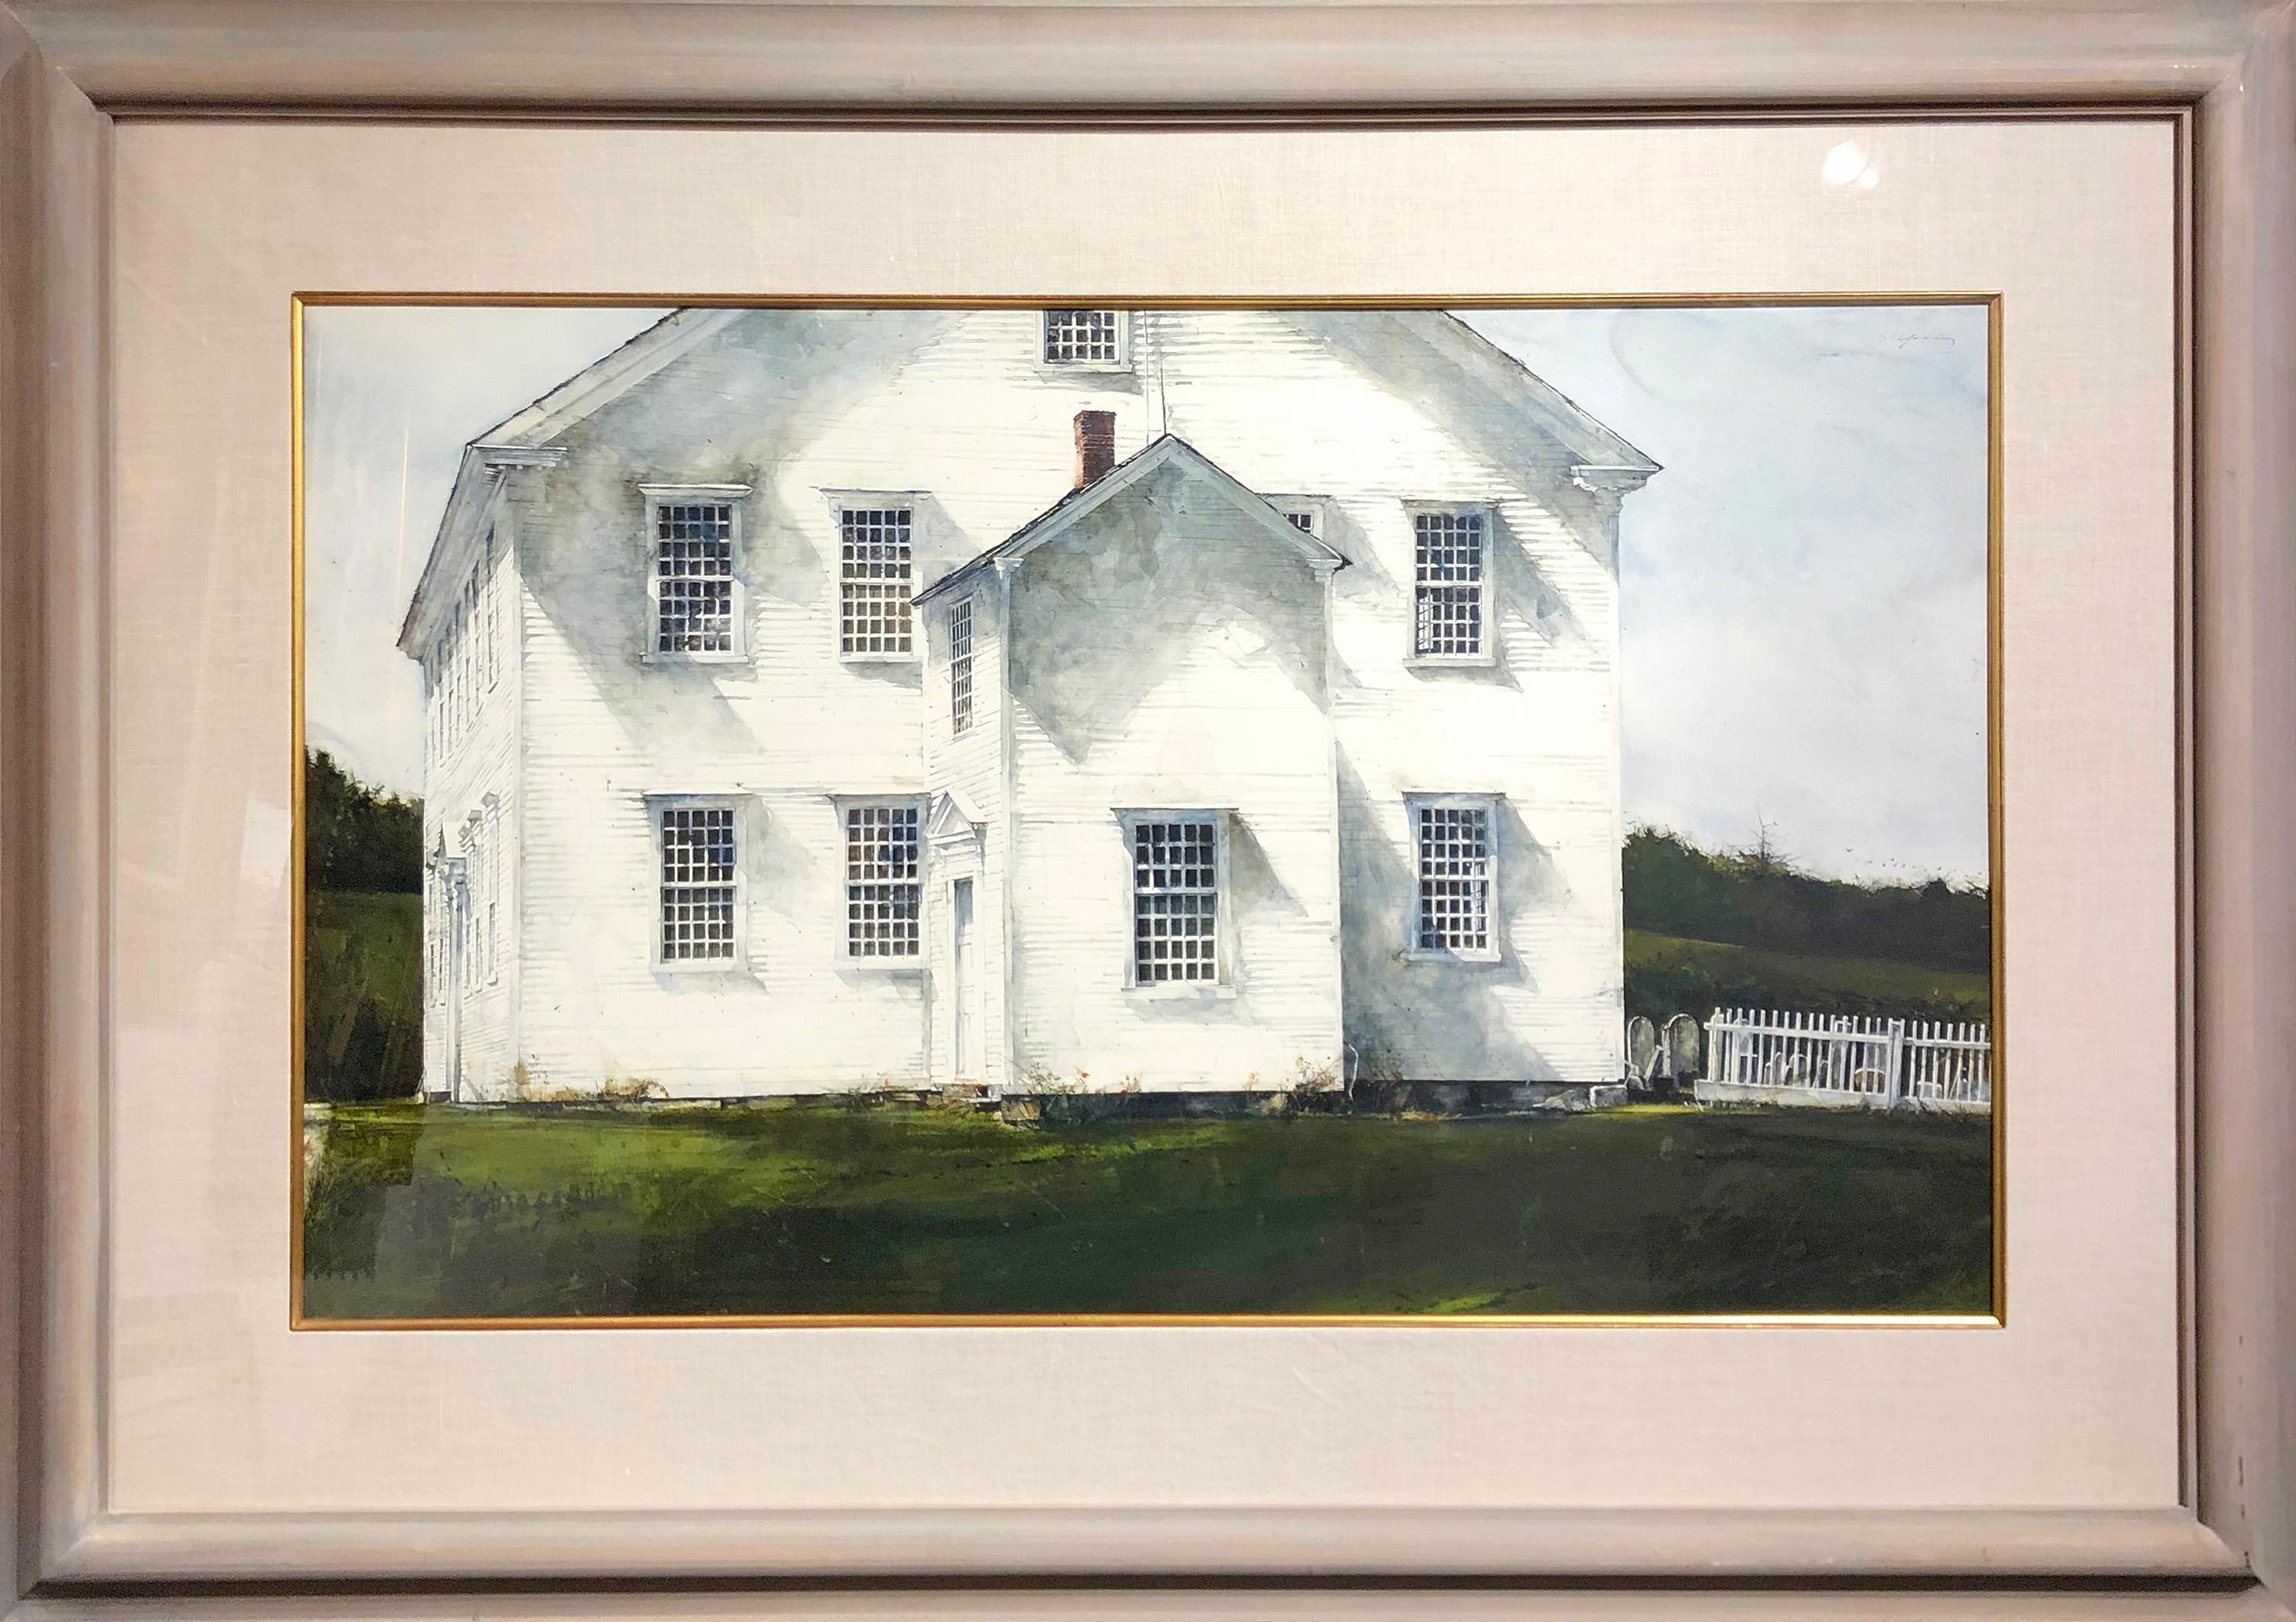 Meeting House - Art by Stephen Scott Young